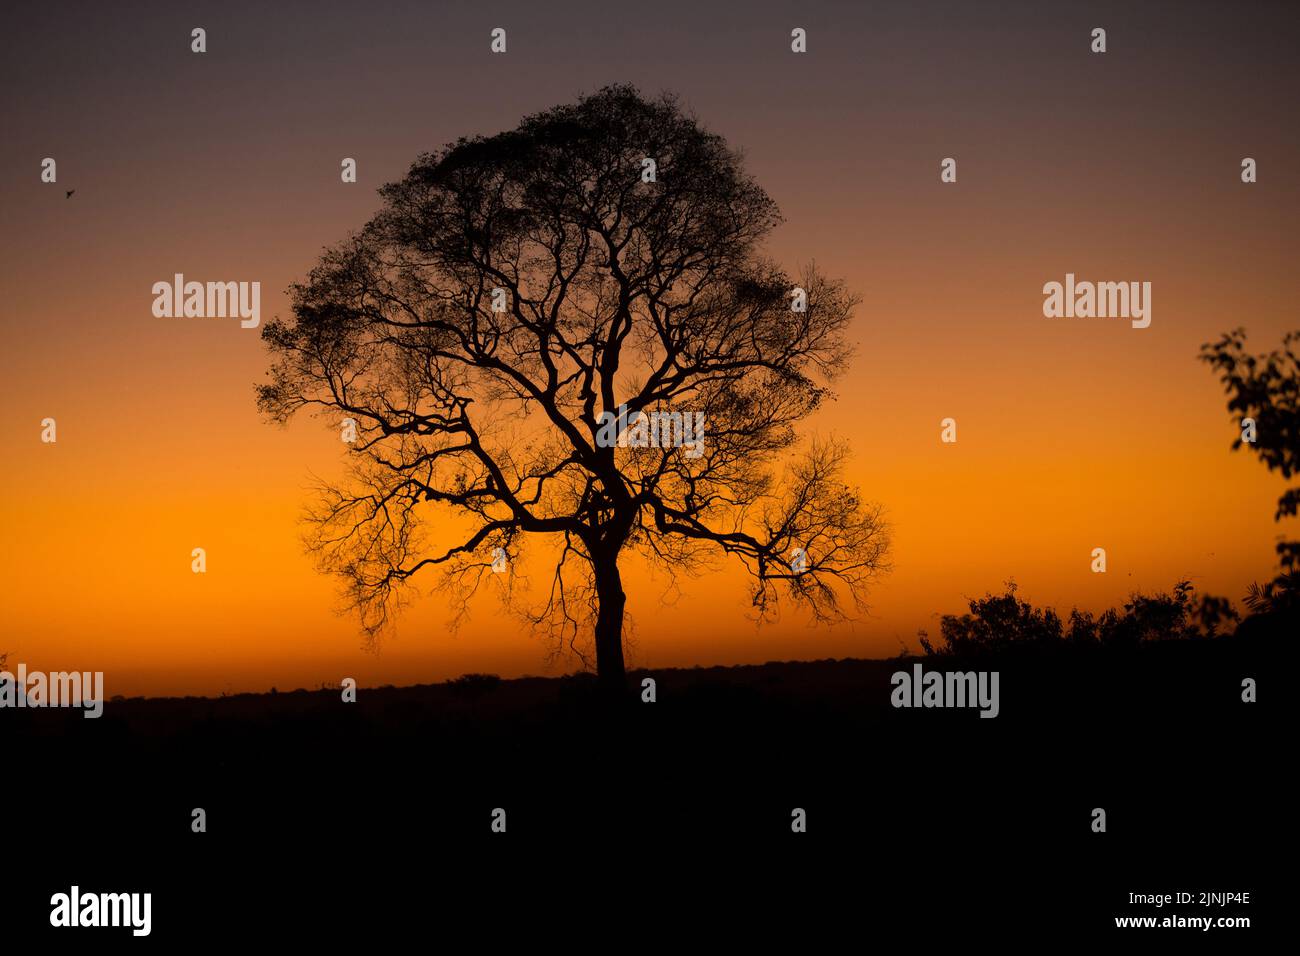 silhouette of a tree in the evening glow, Brazil, Pantanal Stock Photo